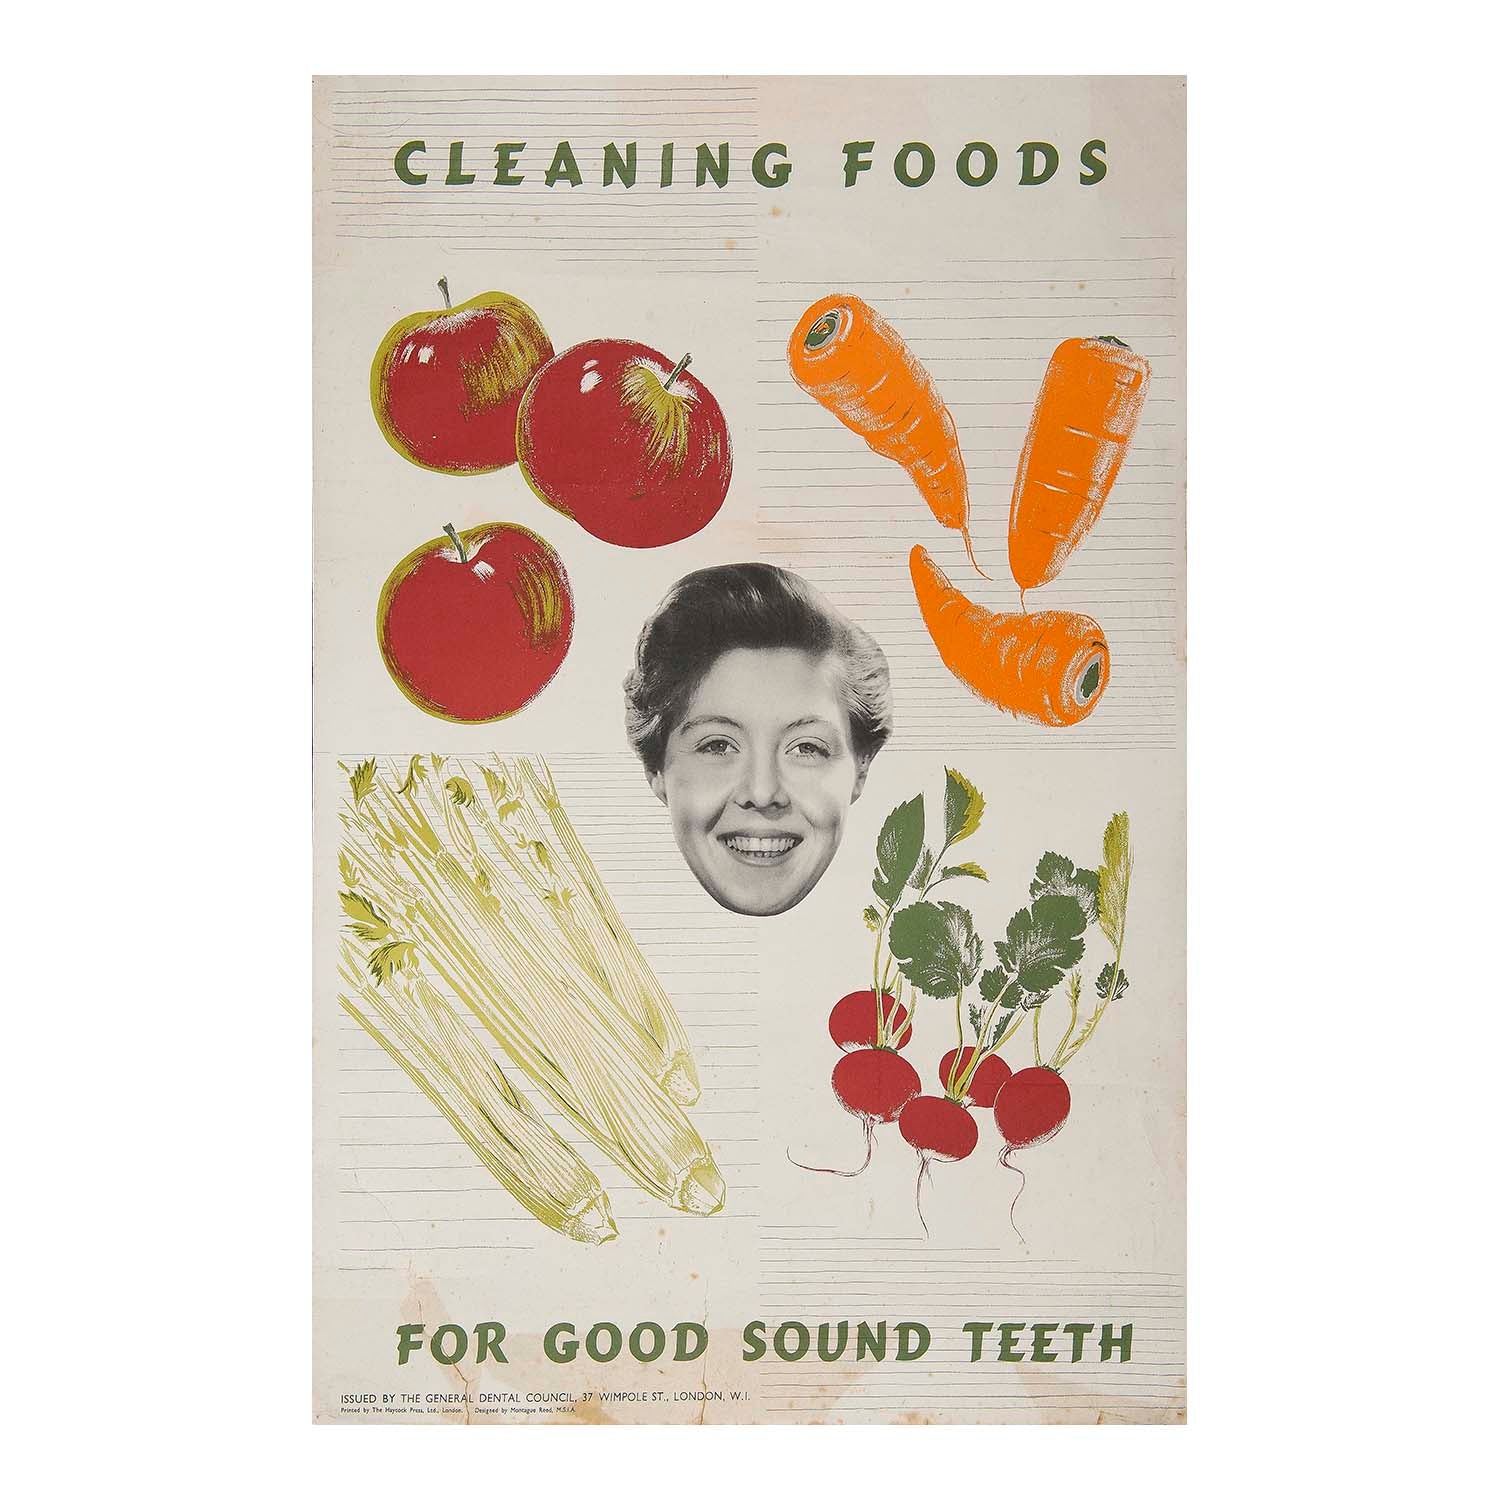 poster issued by the General Dental Council of Great Britain, Cleaning Foods for Good Sound Teeth. Designed by Montague Reed. The poster depicts graphic representations of ‘cleaning foods’ associated with good dental hygiene (such as apples and carrots) circling the photographic heads of a smiling woman.